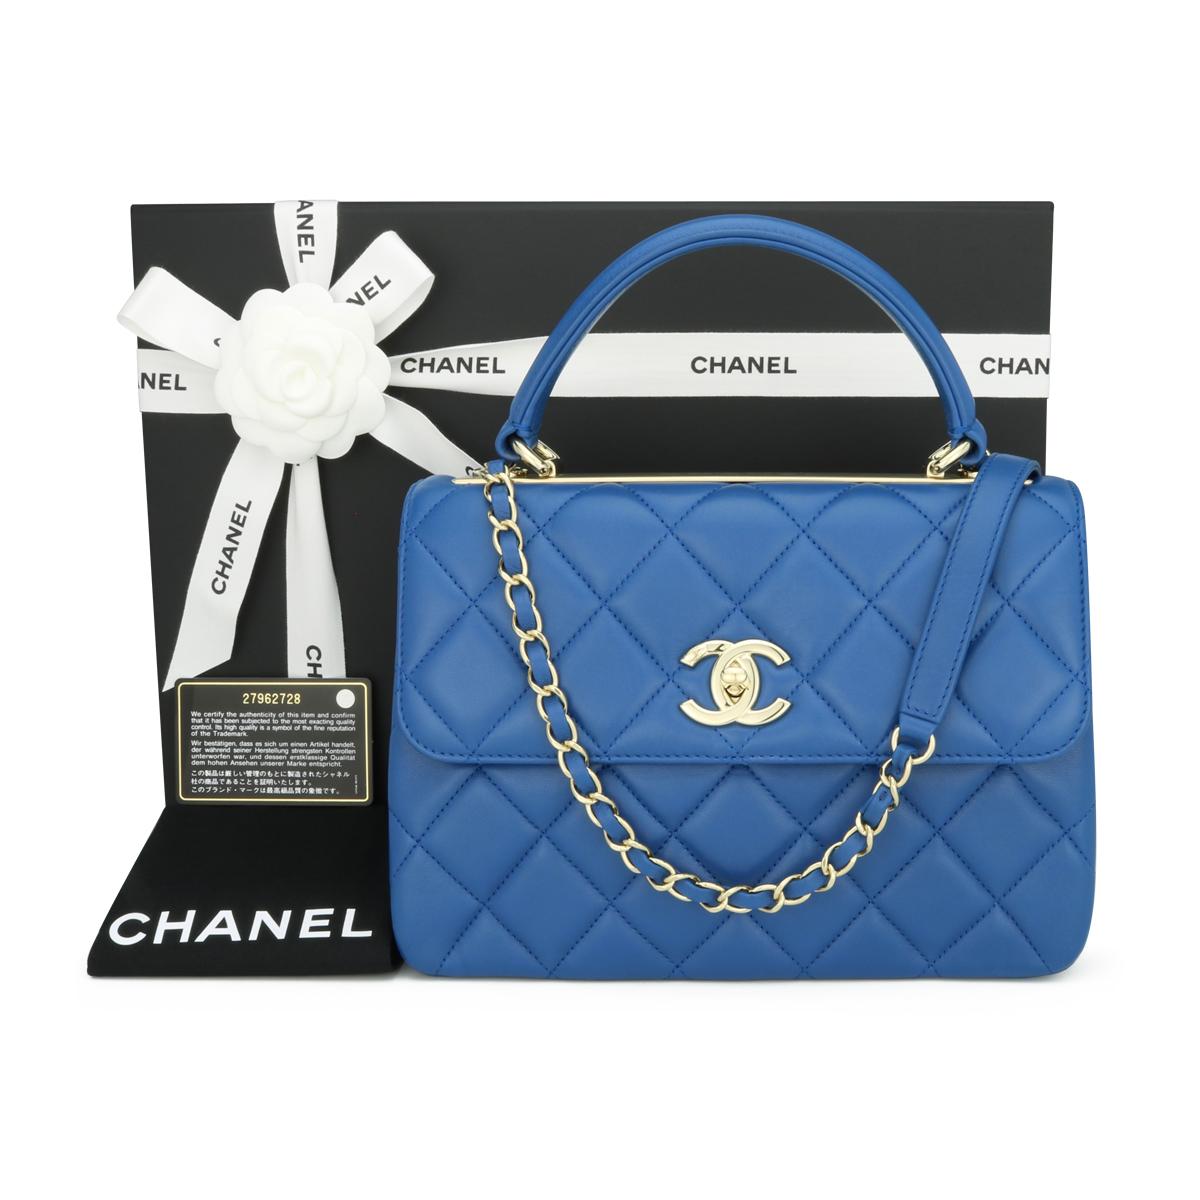 CHANEL Trendy CC Top Handle Bag Small Blue Lambskin with Light Gold Hardware 2019 – 19S.

This stunning bag is in very good condition, the bag still holds its original shape, and the hardware is still very shiny. The leather smells fresh, as if